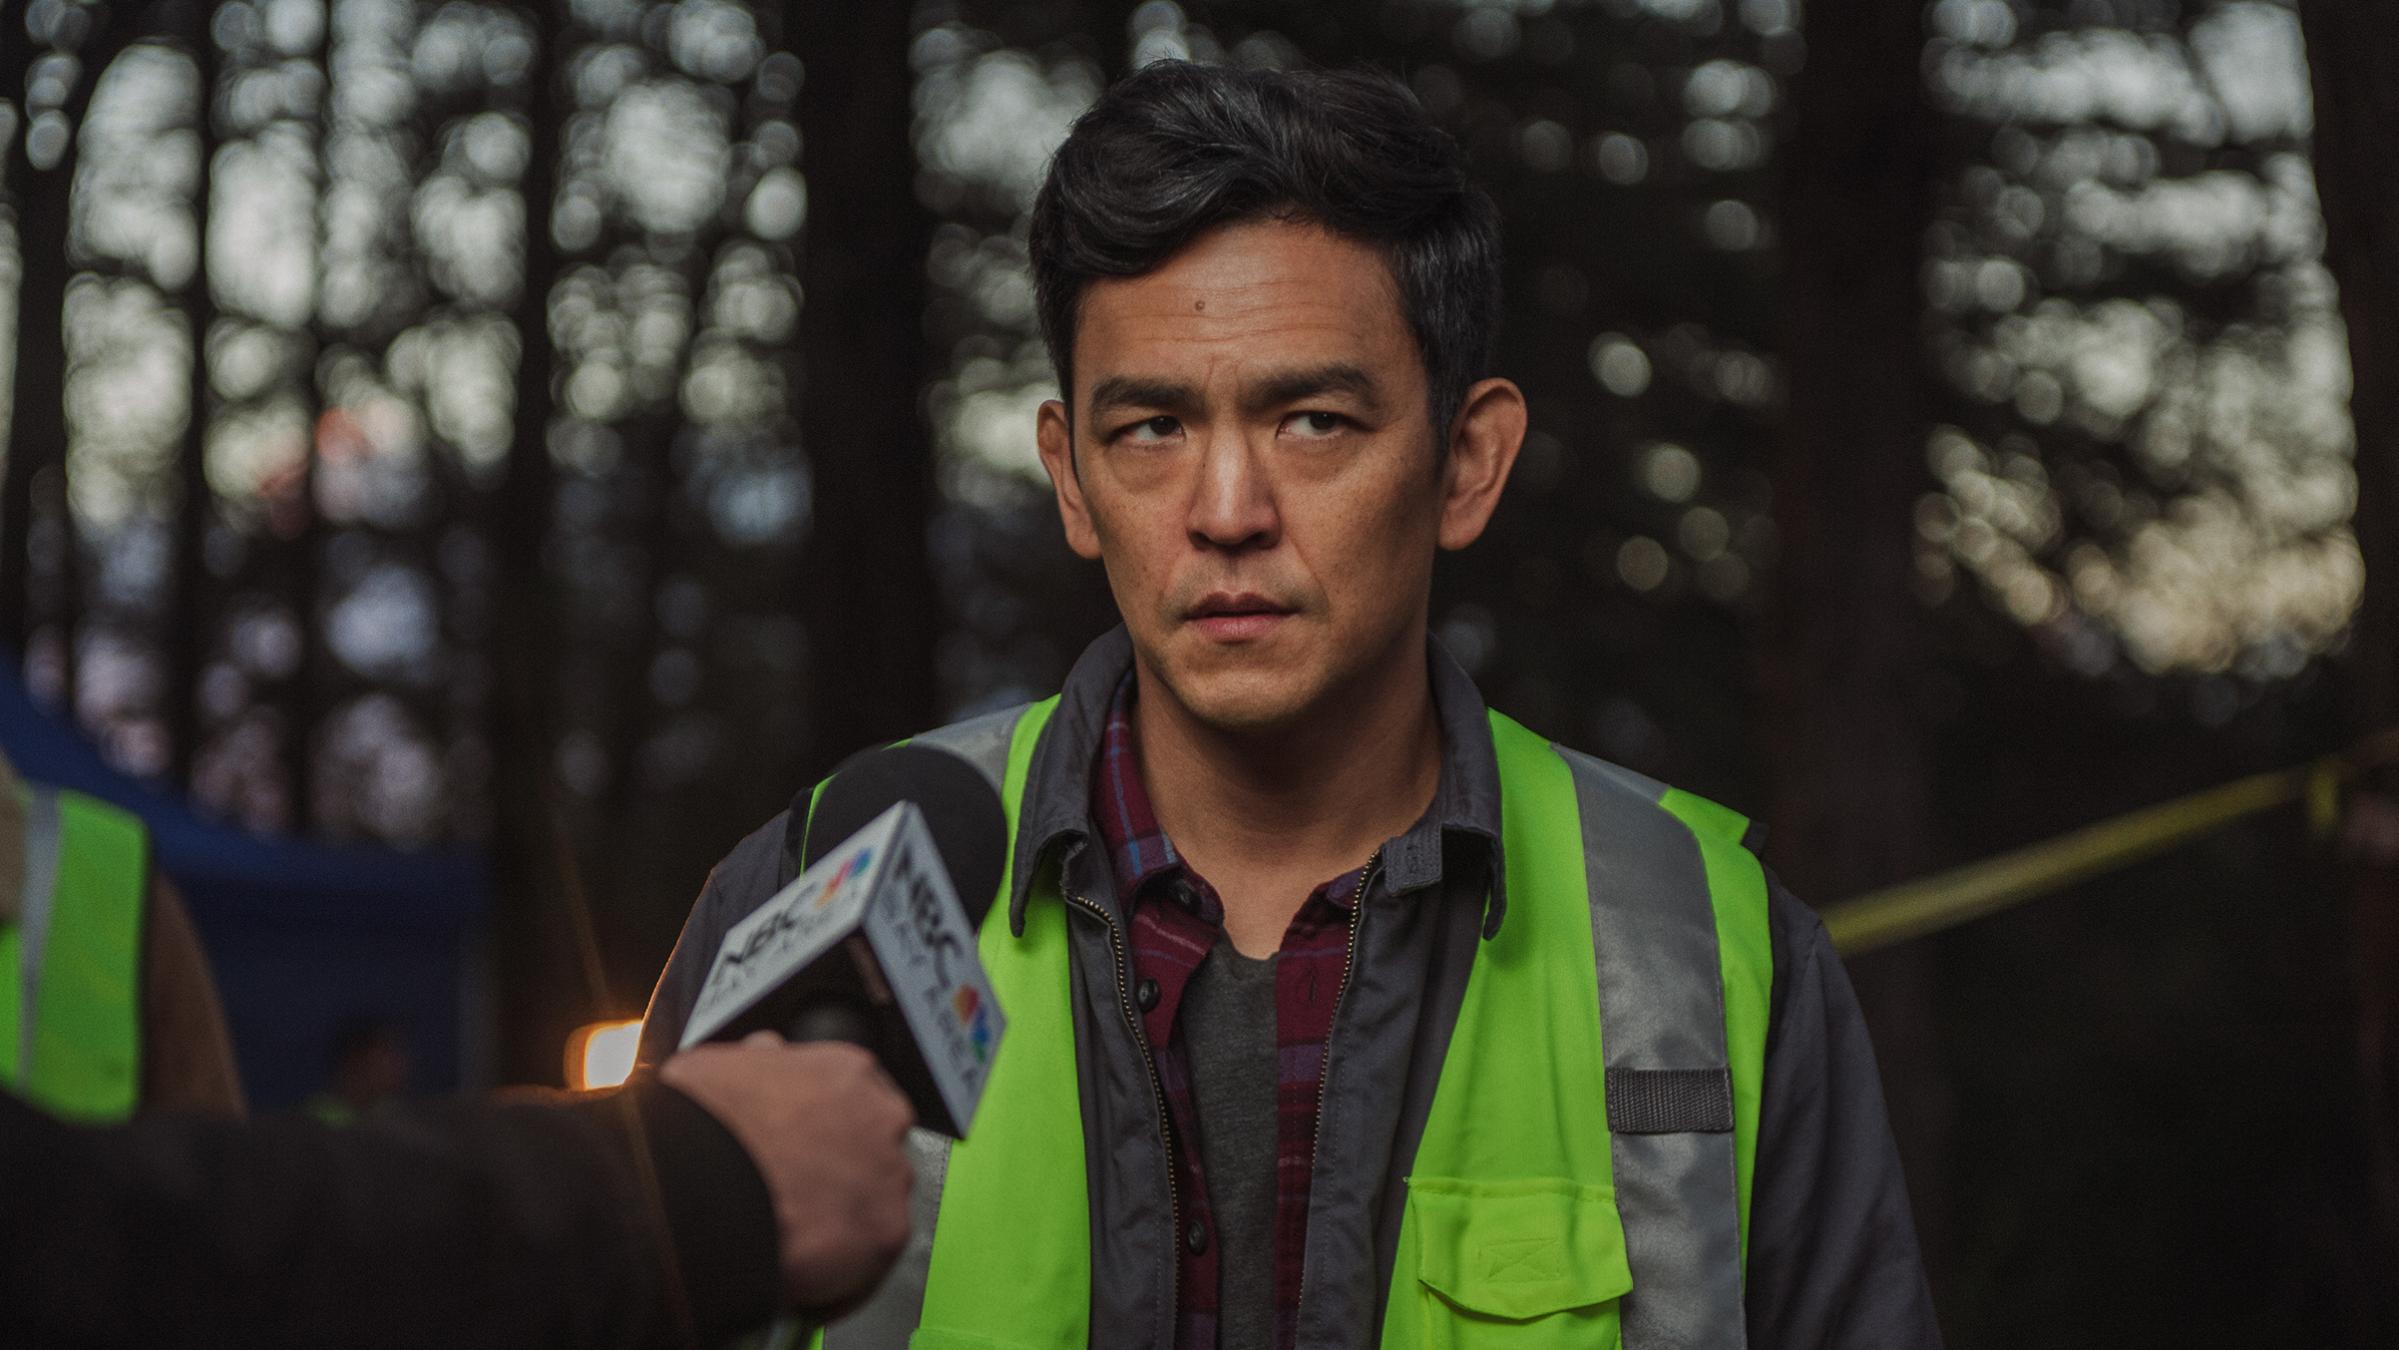 John Cho in the movie Searching